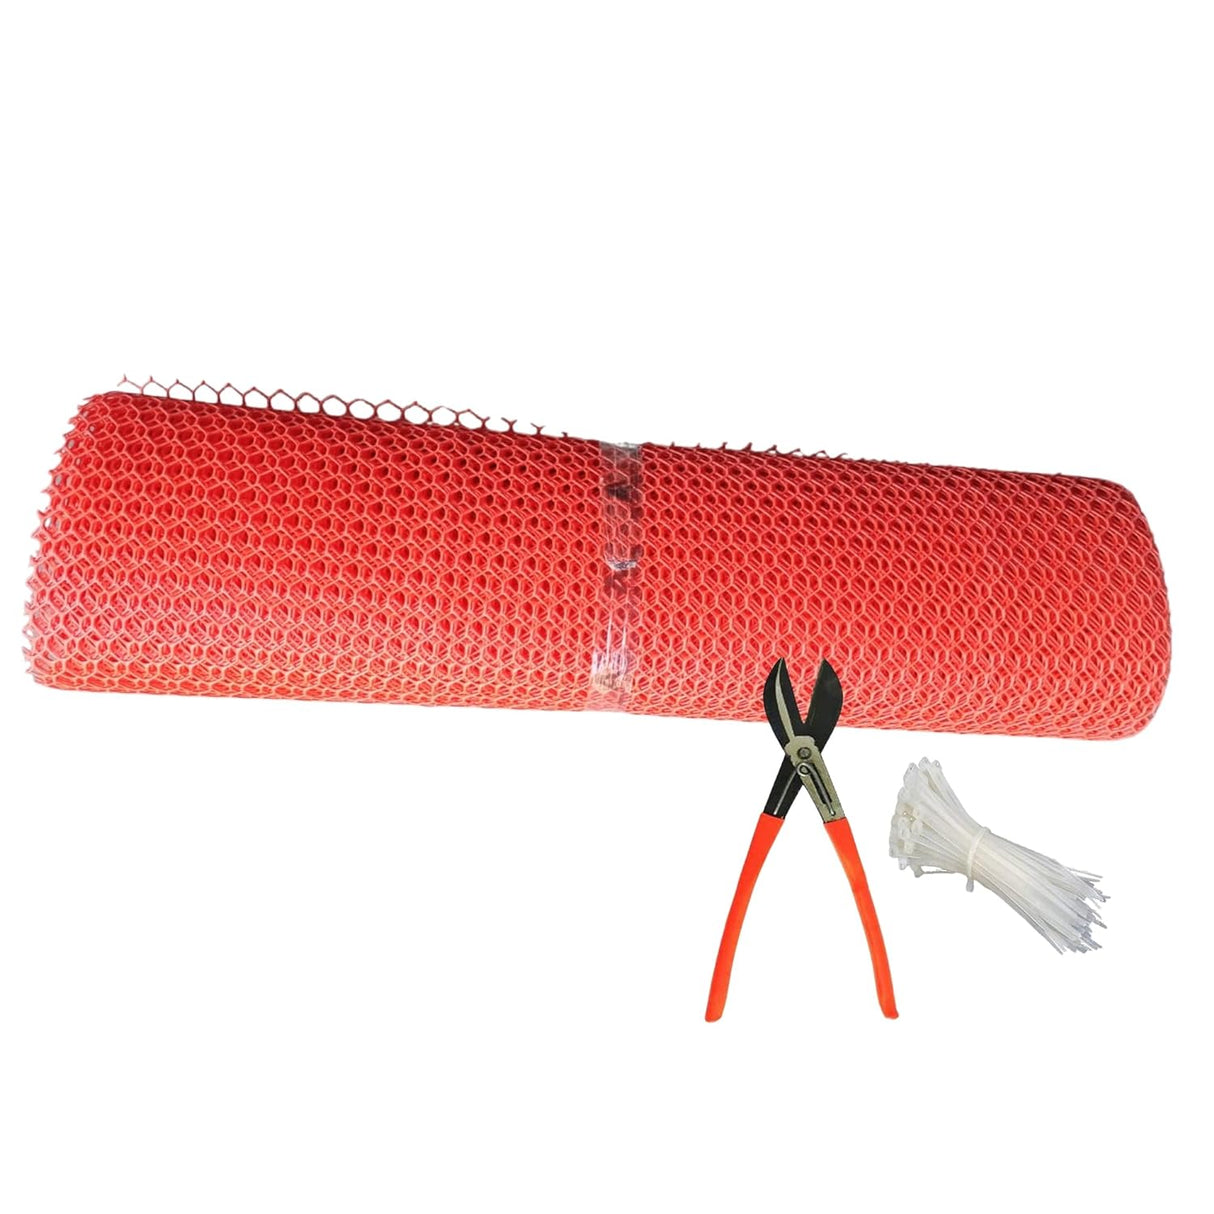 Singhal Tree Guard Net, Garden Fencing Net Virgin Plastic with 1 Cutter and 50 PVC Tags (Red, 4 ft x 25 ft)